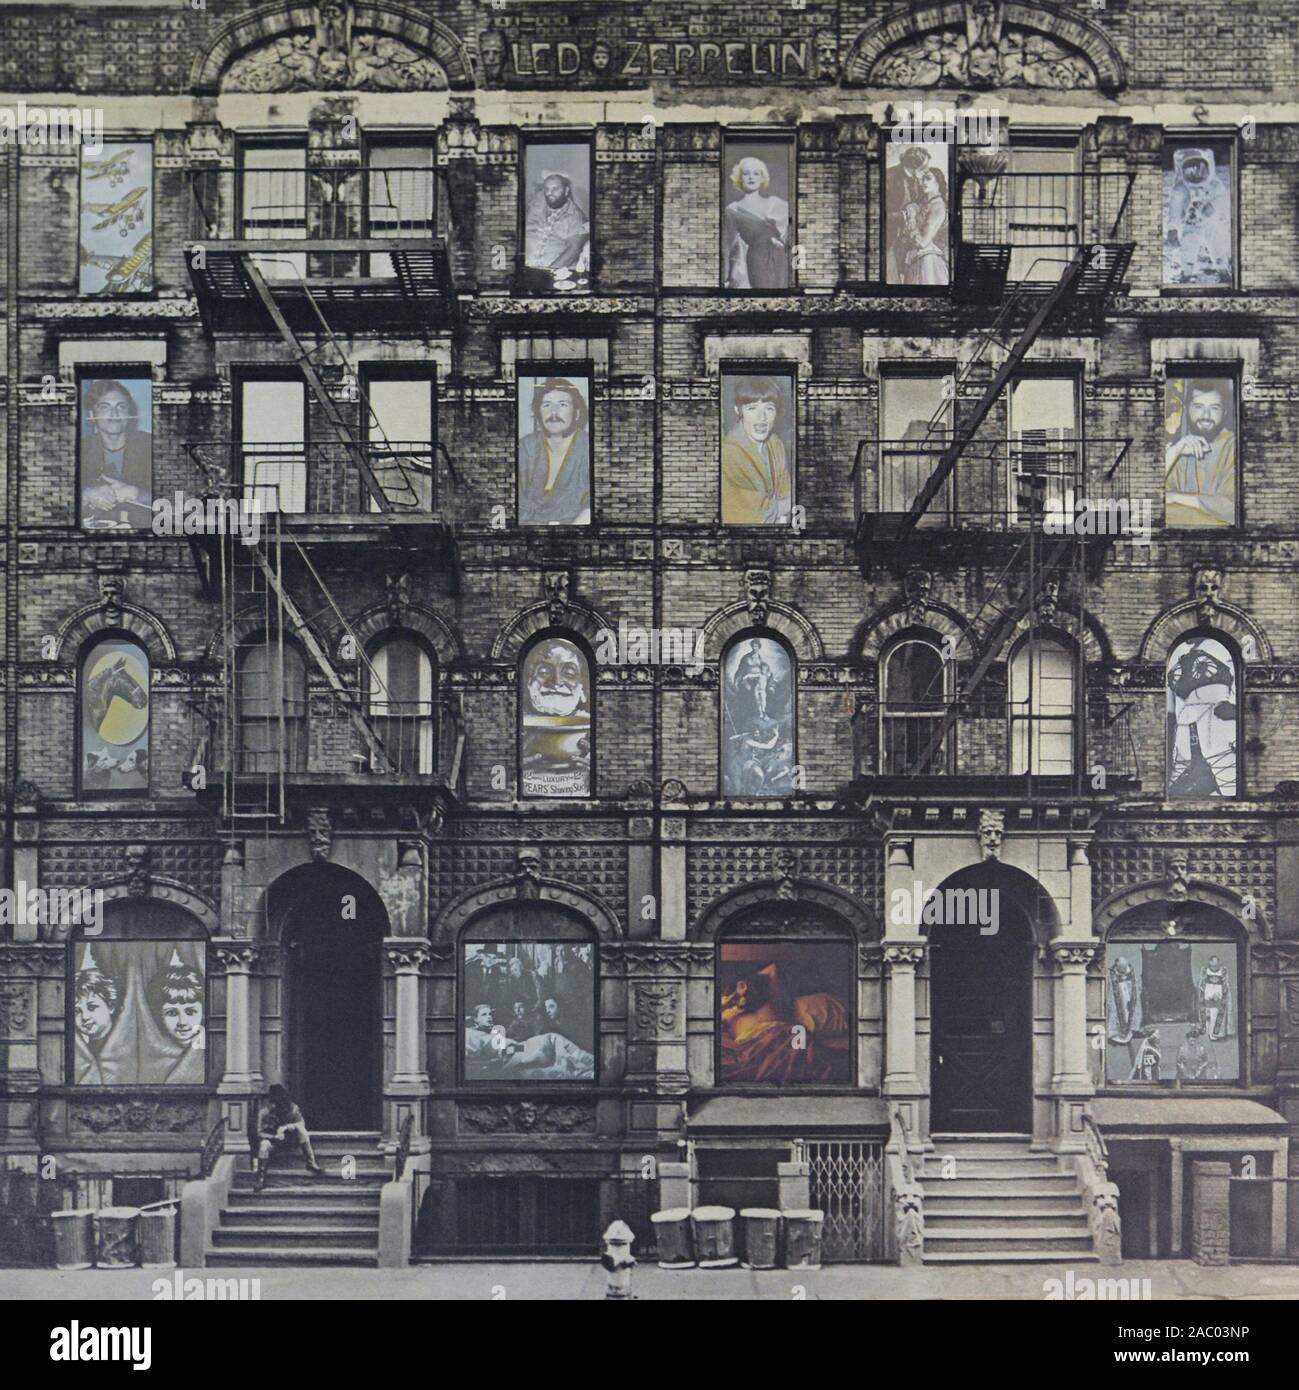 Led zeppelin physical. Лед Зеппелин physical Graffiti. Led Zeppelin. Physical Graffiti 2 LP. Лед Зеппелин 1975. Led Zeppelin physical Graffiti 1975.